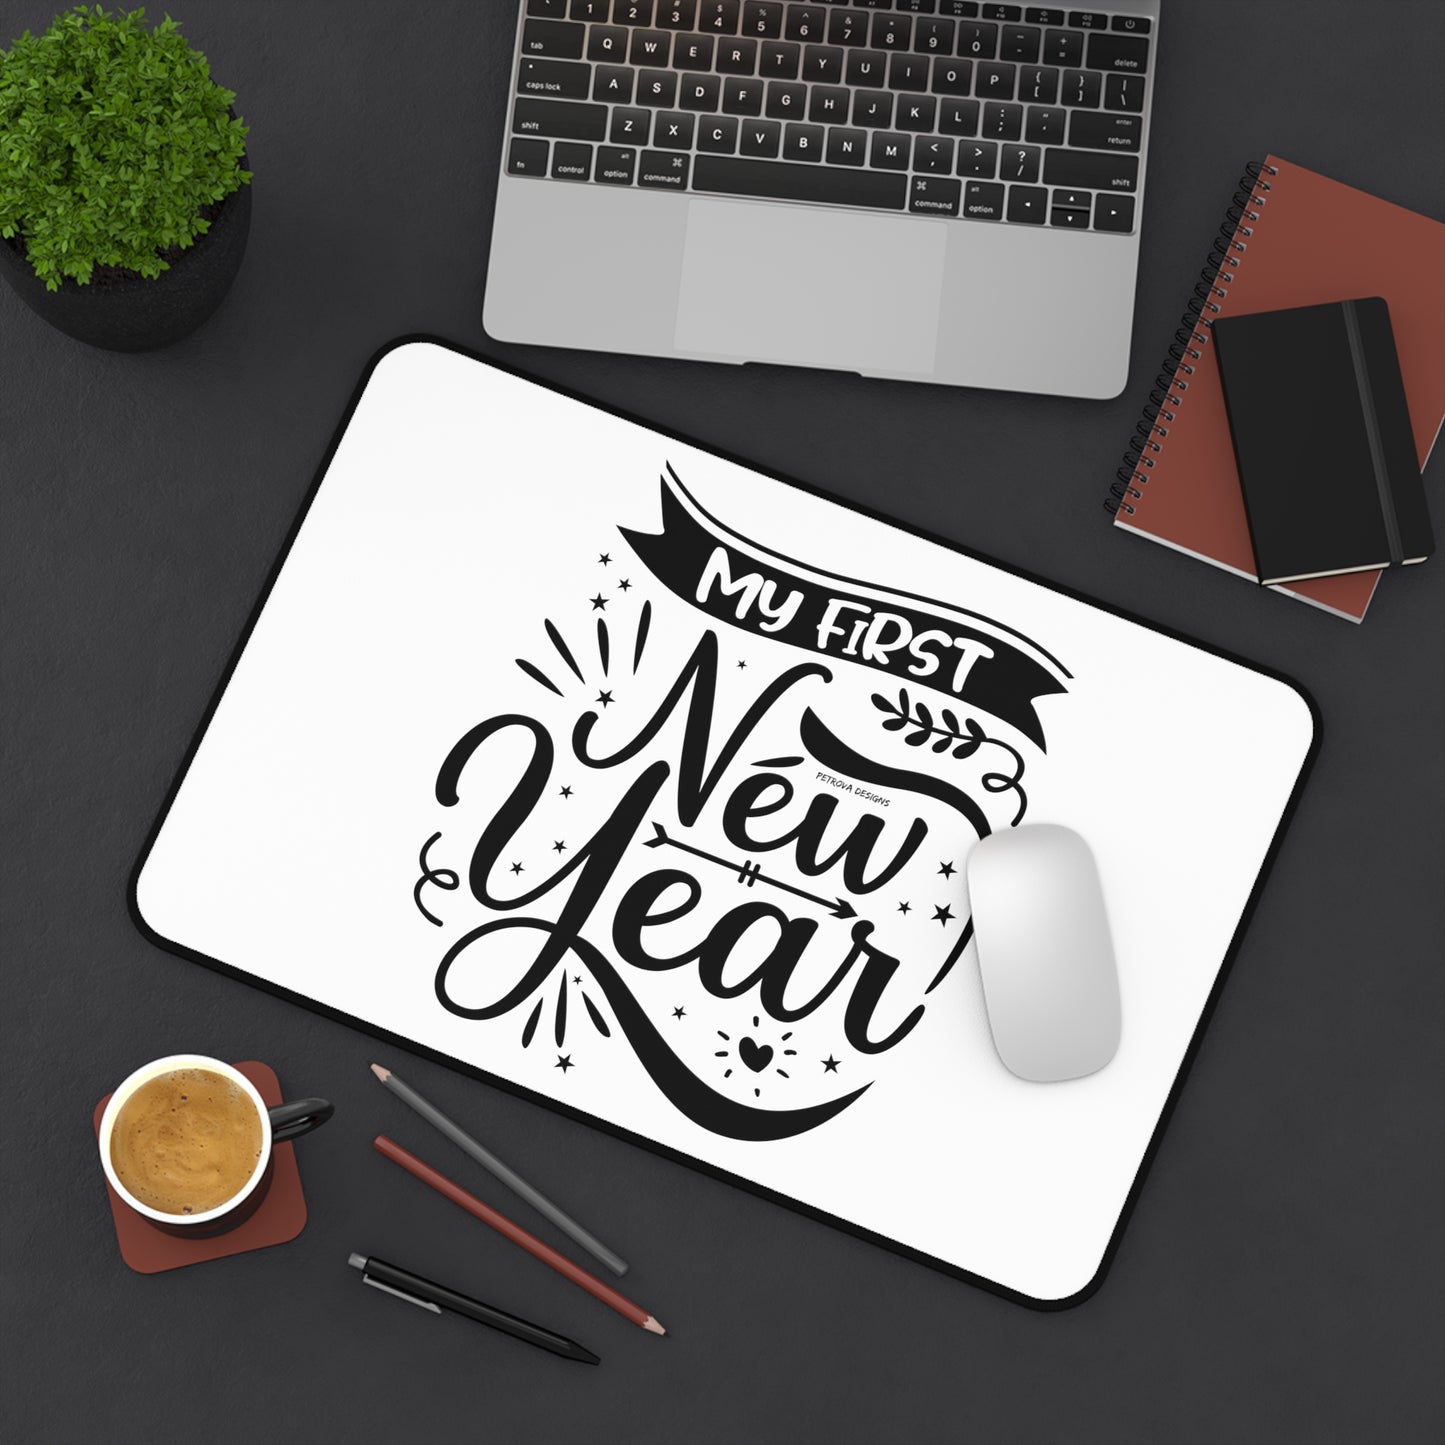 My First New Year Desk Mat (12" × 18" - multiple background colors) Home Decor Petrova Designs